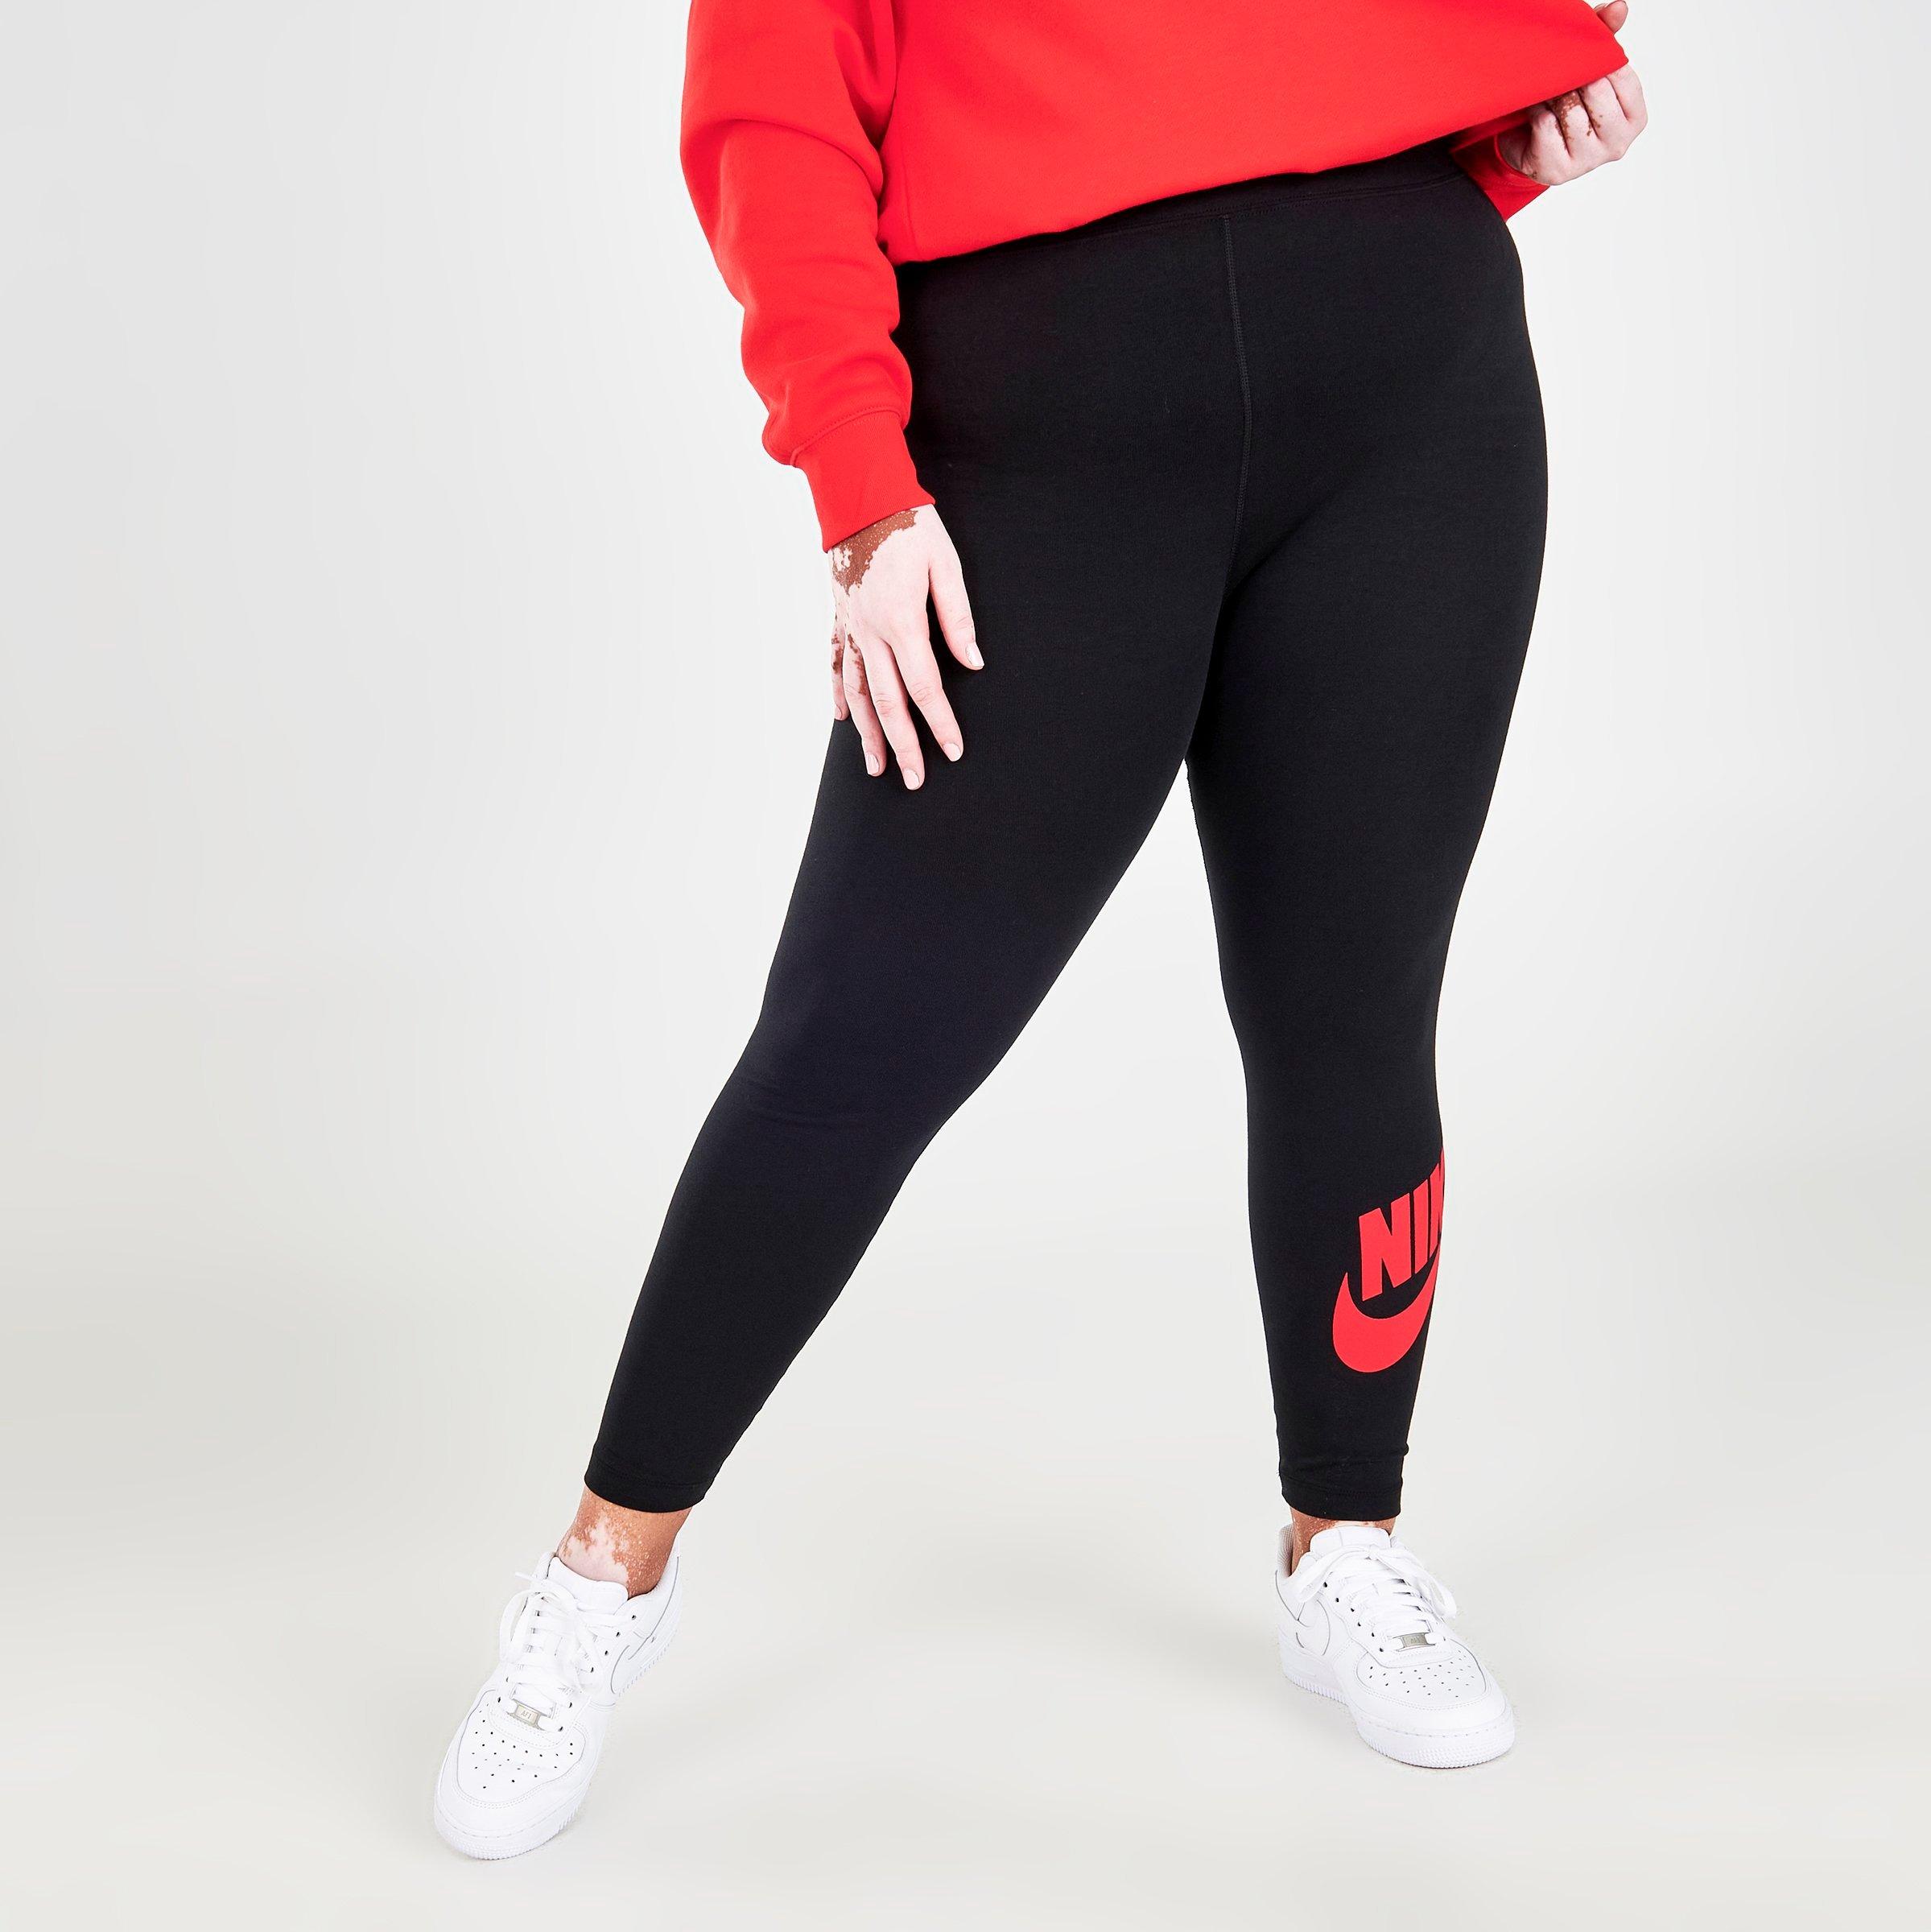 Women's Nike Essential High-Waisted (Plus Size)| Finish Line